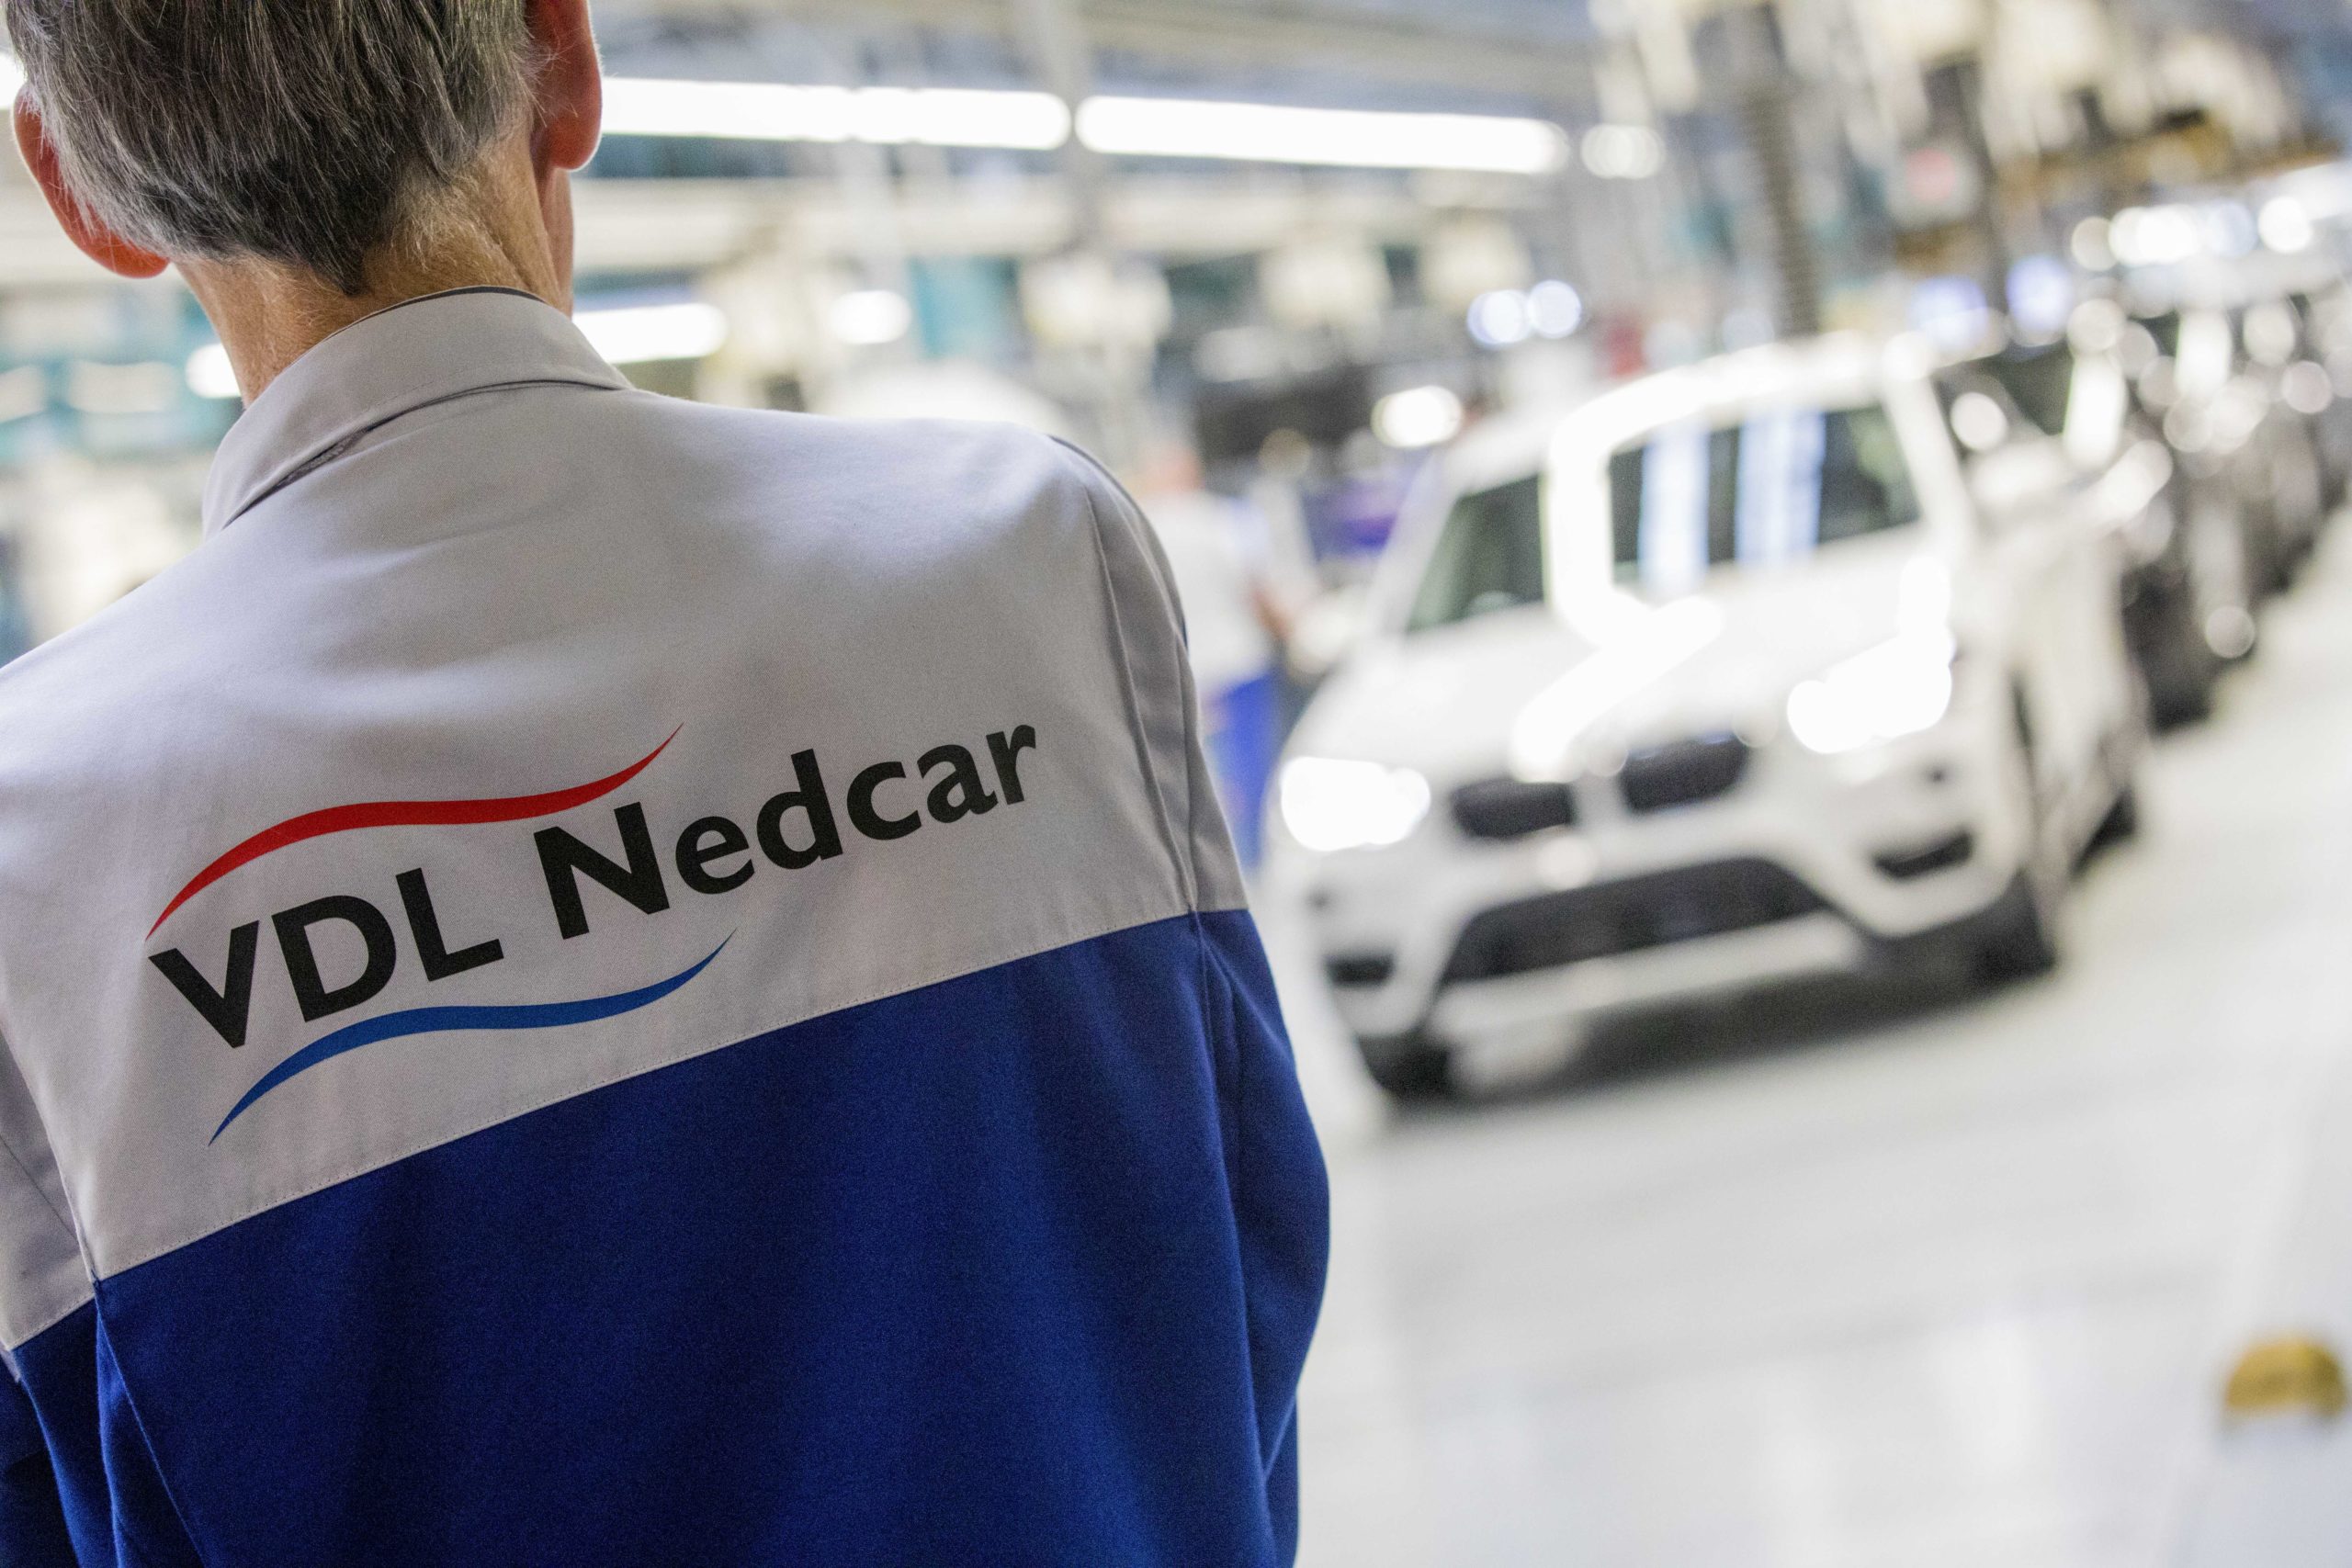 VDL Nedcar 4 600 jobs at stake by BMW's departure newmobility.news